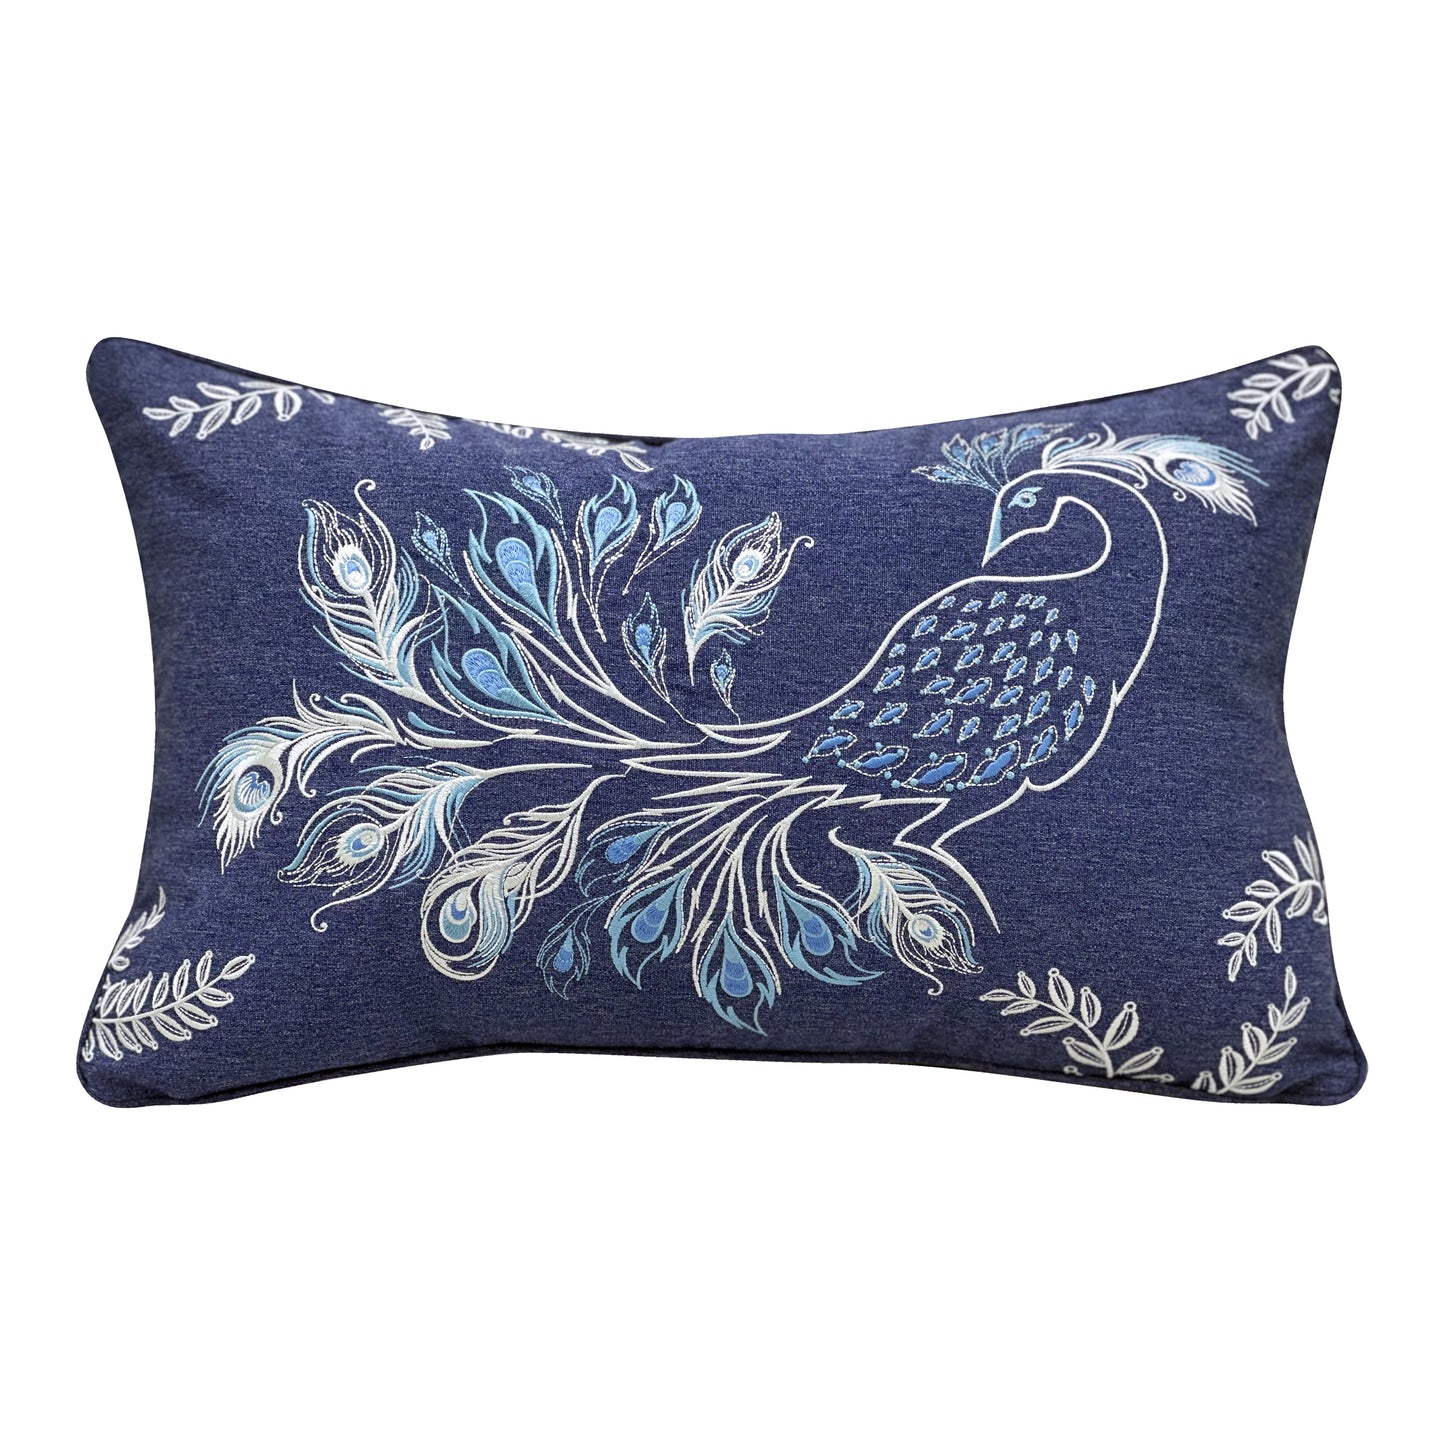 A fancy peacock emboridered in hues of blue and white on a navy background. Sprigs of leaves frame the pillow at each corner.